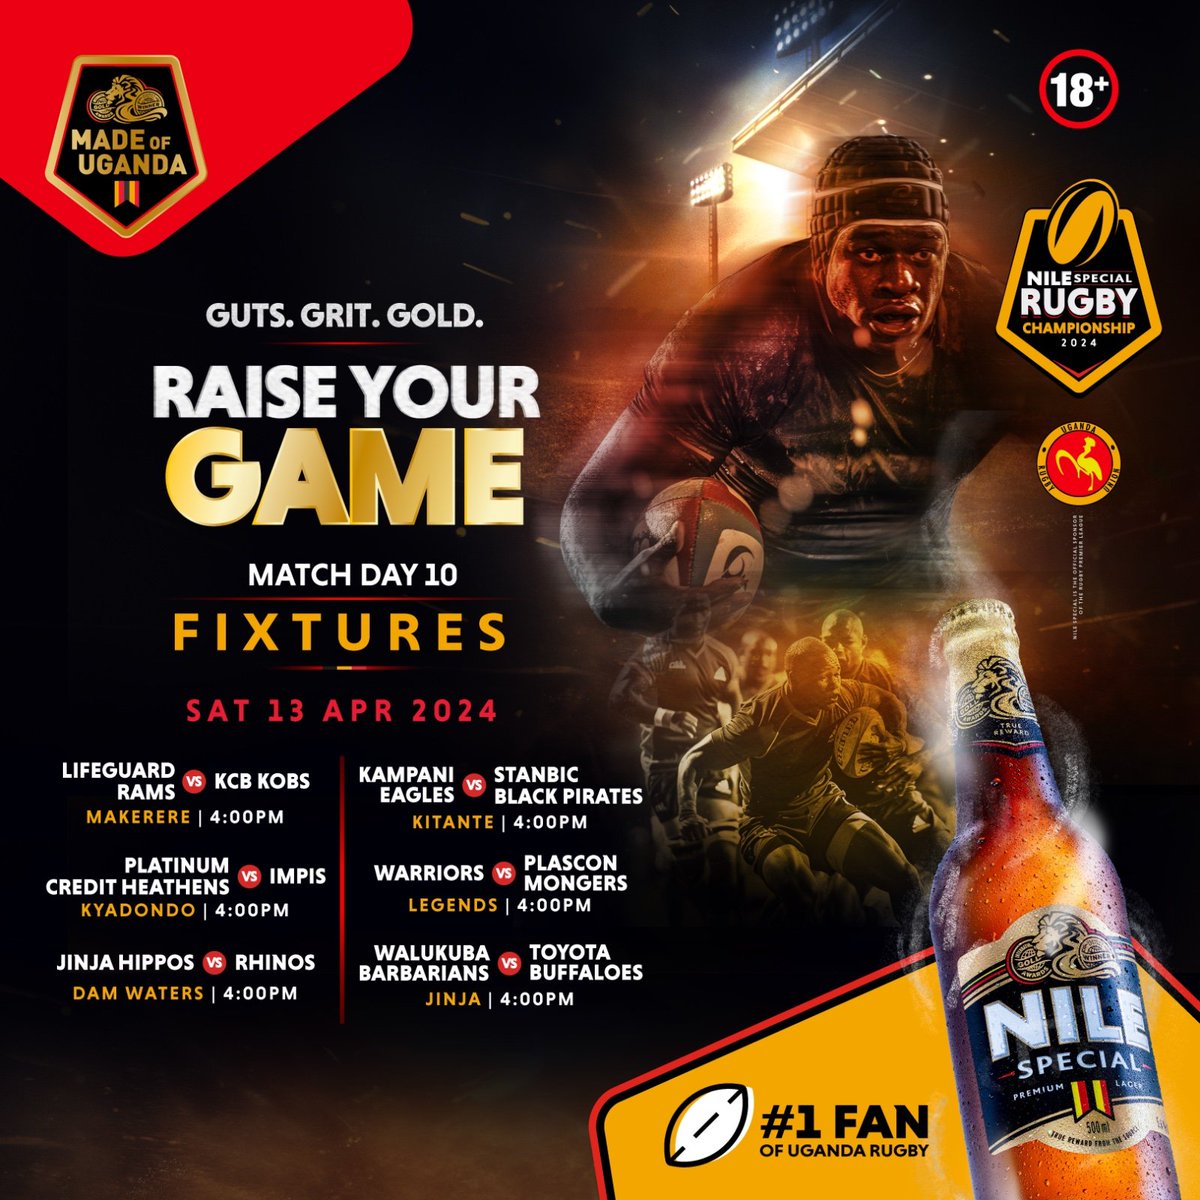 As the #NSRC hits match Day 10, the pressure has drawn more unto those fighting the chains of relegation. Who will impress Game week 10? Don your club jersey and support your team raise their game this Saturday... #RaiseYourGame #GutsGritGold #UnmatchedinGold #NSRC2024